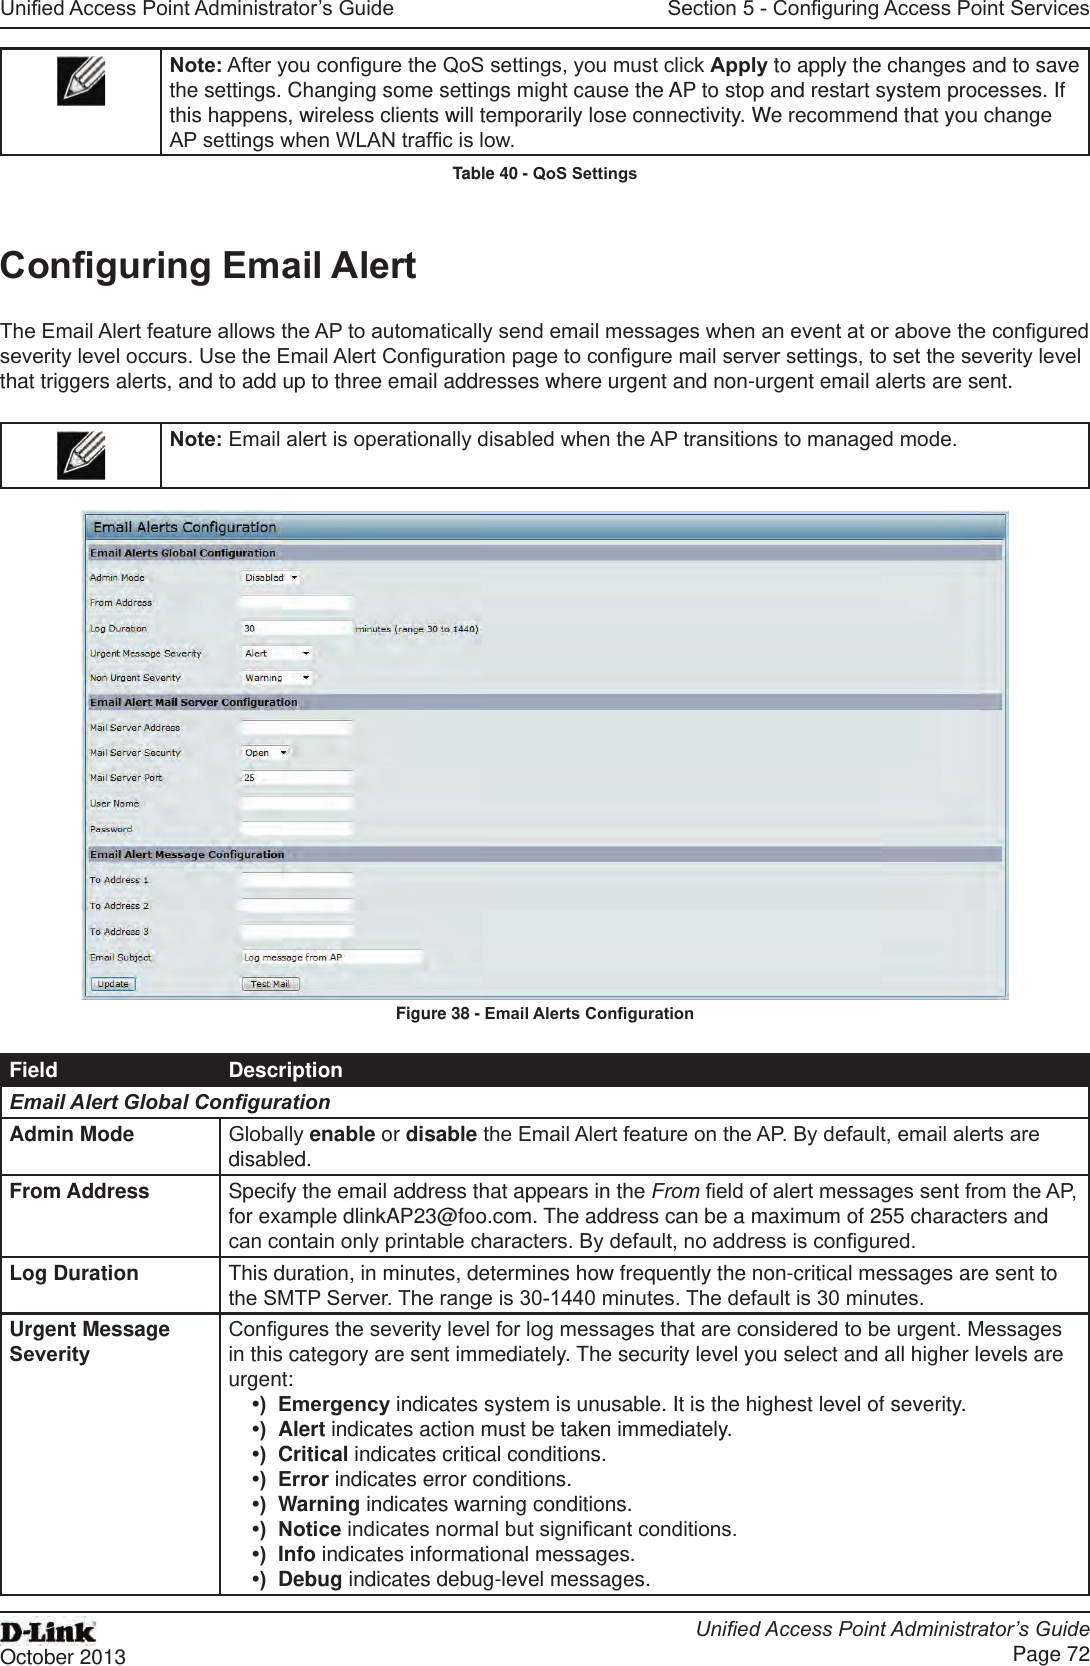 Unied Access Point Administrator’s GuideUnied Access Point Administrator’s GuidePage 72October 2013Section 5 - Conguring Access Point ServicesNote: After you congure the QoS settings, you must click Apply to apply the changes and to save the settings. Changing some settings might cause the AP to stop and restart system processes. If this happens, wireless clients will temporarily lose connectivity. We recommend that you change AP settings when WLAN trafc is low. Table 40 - QoS SettingsConguring Email AlertThe Email Alert feature allows the AP to automatically send email messages when an event at or above the congured severity level occurs. Use the Email Alert Conguration page to congure mail server settings, to set the severity level that triggers alerts, and to add up to three email addresses where urgent and non-urgent email alerts are sent.Note: Email alert is operationally disabled when the AP transitions to managed mode.Figure 38 - Email Alerts CongurationField DescriptionEmail Alert Global CongurationAdmin Mode Globally enable or disable the Email Alert feature on the AP. By default, email alerts are disabled.From Address Specify the email address that appears in the From eld of alert messages sent from the AP, for example dlinkAP23@foo.com. The address can be a maximum of 255 characters and can contain only printable characters. By default, no address is congured.Log Duration This duration, in minutes, determines how frequently the non-critical messages are sent to the SMTP Server. The range is 30-1440 minutes. The default is 30 minutes.Urgent Message SeverityCongures the severity level for log messages that are considered to be urgent. Messages in this category are sent immediately. The security level you select and all higher levels are urgent:•)  Emergency indicates system is unusable. It is the highest level of severity.•)  Alert indicates action must be taken immediately.•)  Critical indicates critical conditions.•)  Error indicates error conditions.•)  Warning indicates warning conditions.•)  Notice indicates normal but signicant conditions.•)  Info indicates informational messages.•)  Debug indicates debug-level messages.